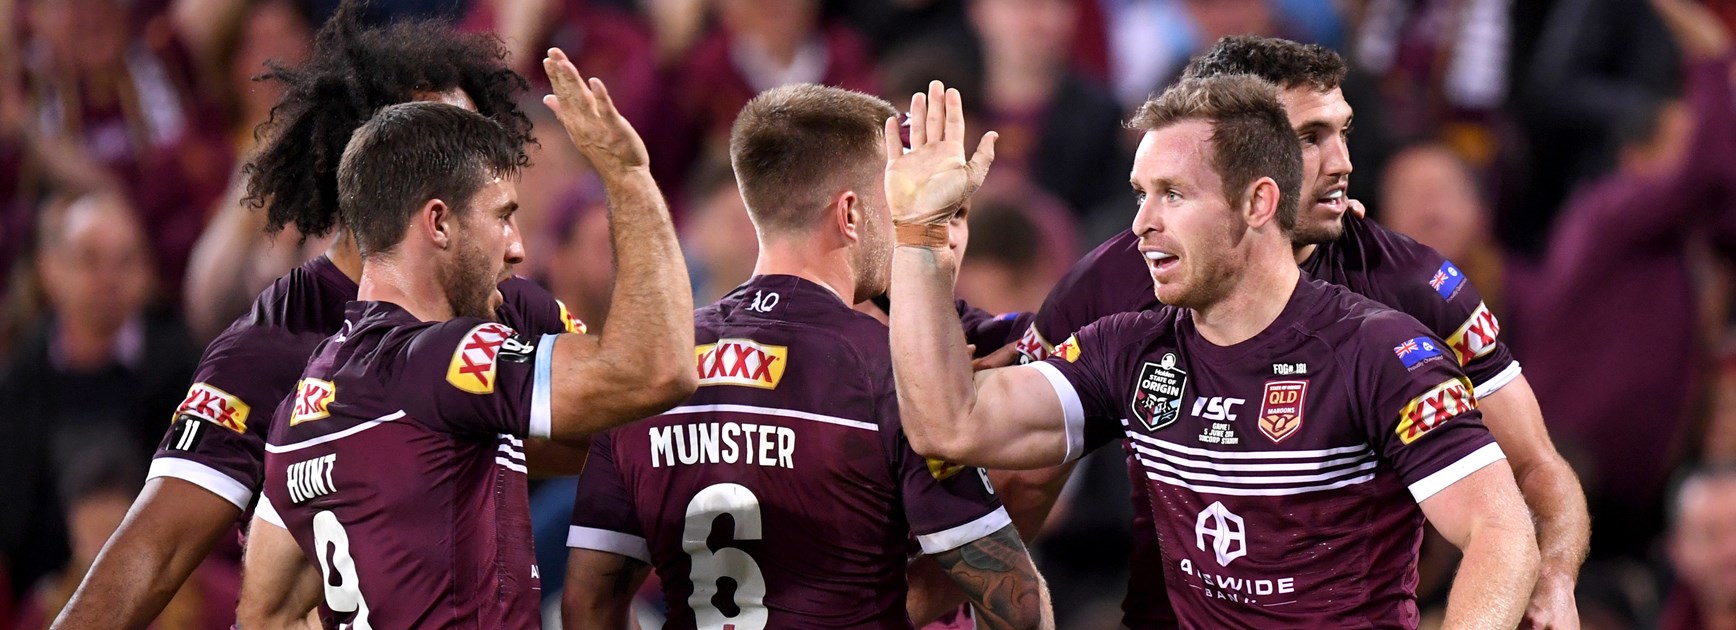 Unique Maroons auction prizes to support bushfire recovery